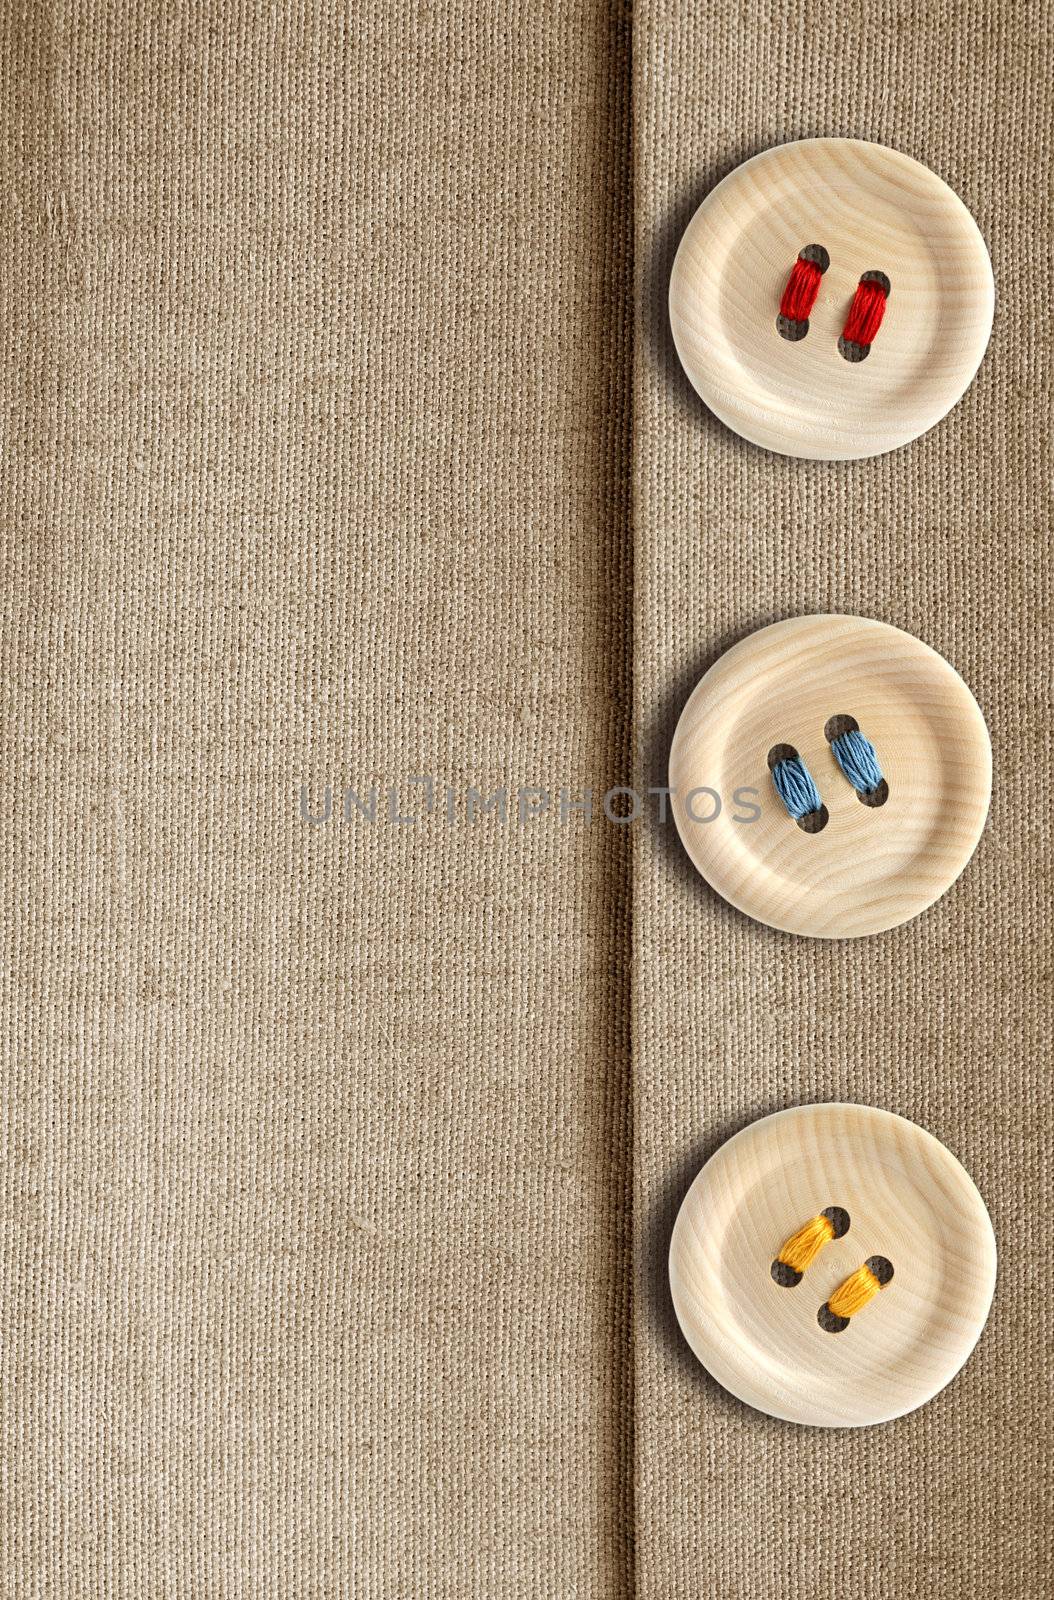 Three wooden button with colored threads on canvas background